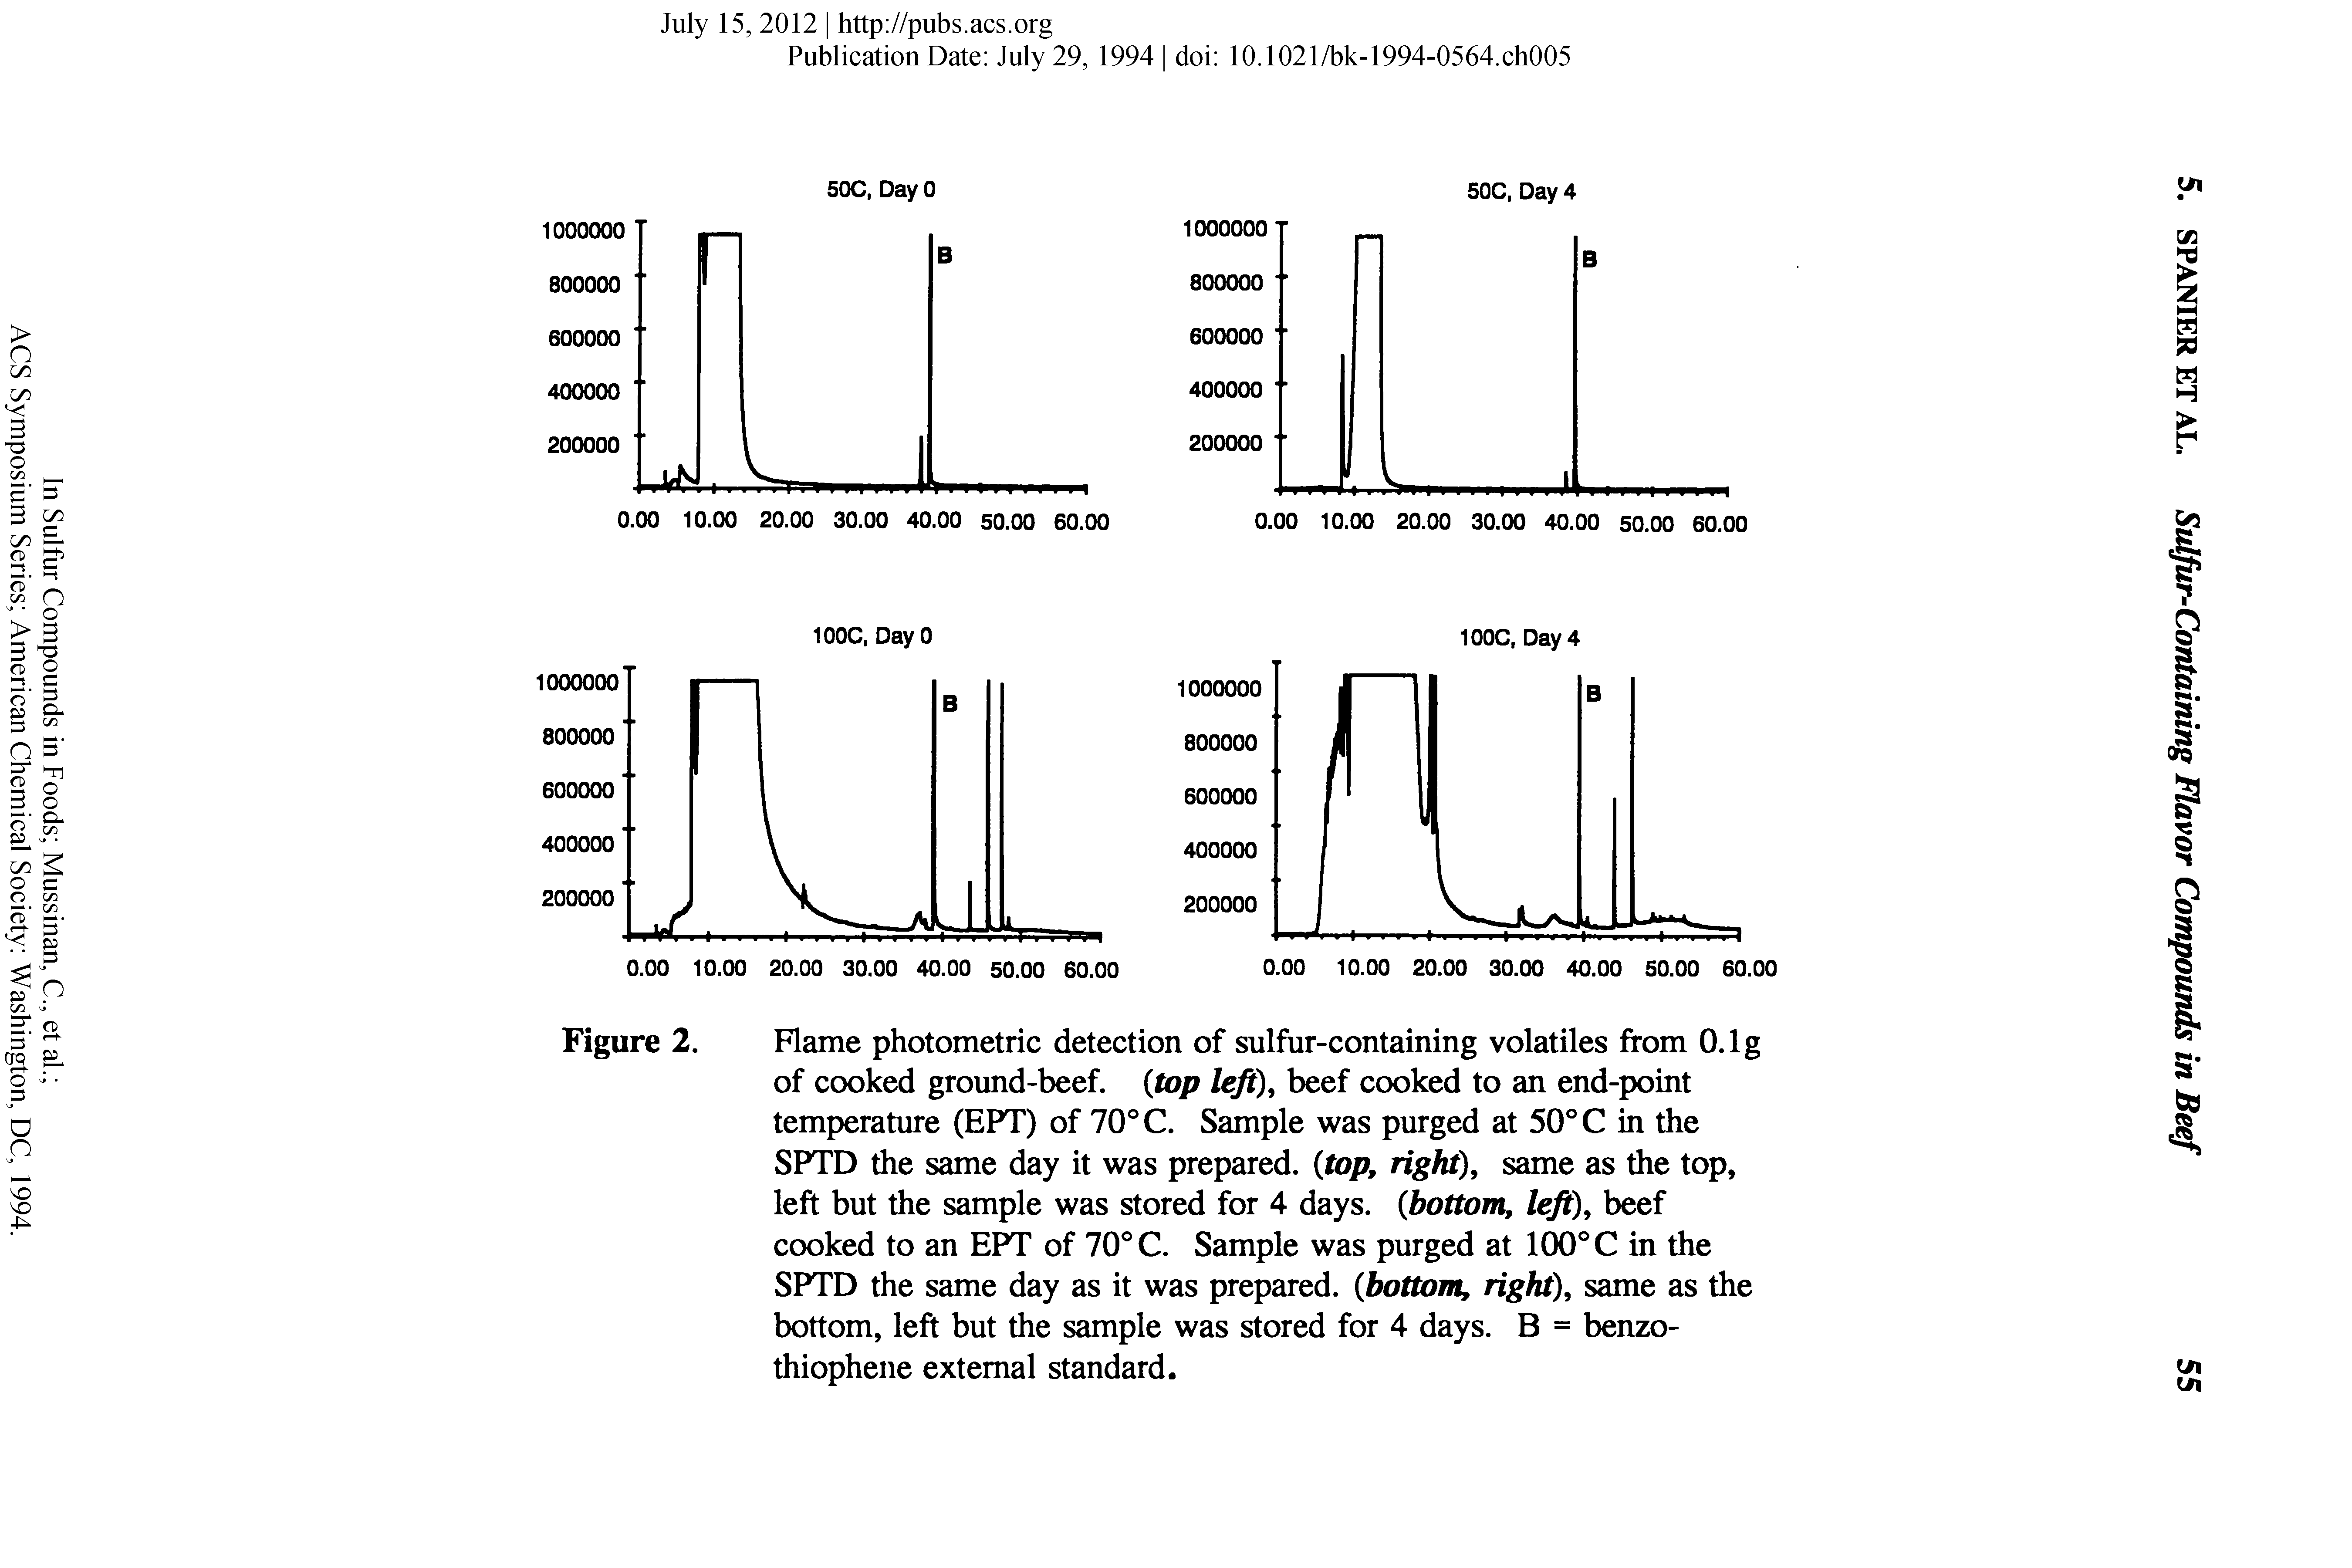 Figure 2. Flame photometric detection of sulfur-containing volatiles from O.lg of cooked ground-beef, top left), beef cooked to an end-point temperature (EPT) of 70° C. Sample was purged at 50° C in the SPTD the same day it was prepared, top, right), same as the top, left but the sample was stored for 4 days, bottom, left), beef cooked to an EPT of 70° C. Sample was purged at 100° C in the SPTD the same day as it was prepared, bottom, right), same as the bottom, left but the sample was stored for 4 days. B = benzo-thiophene external standard.